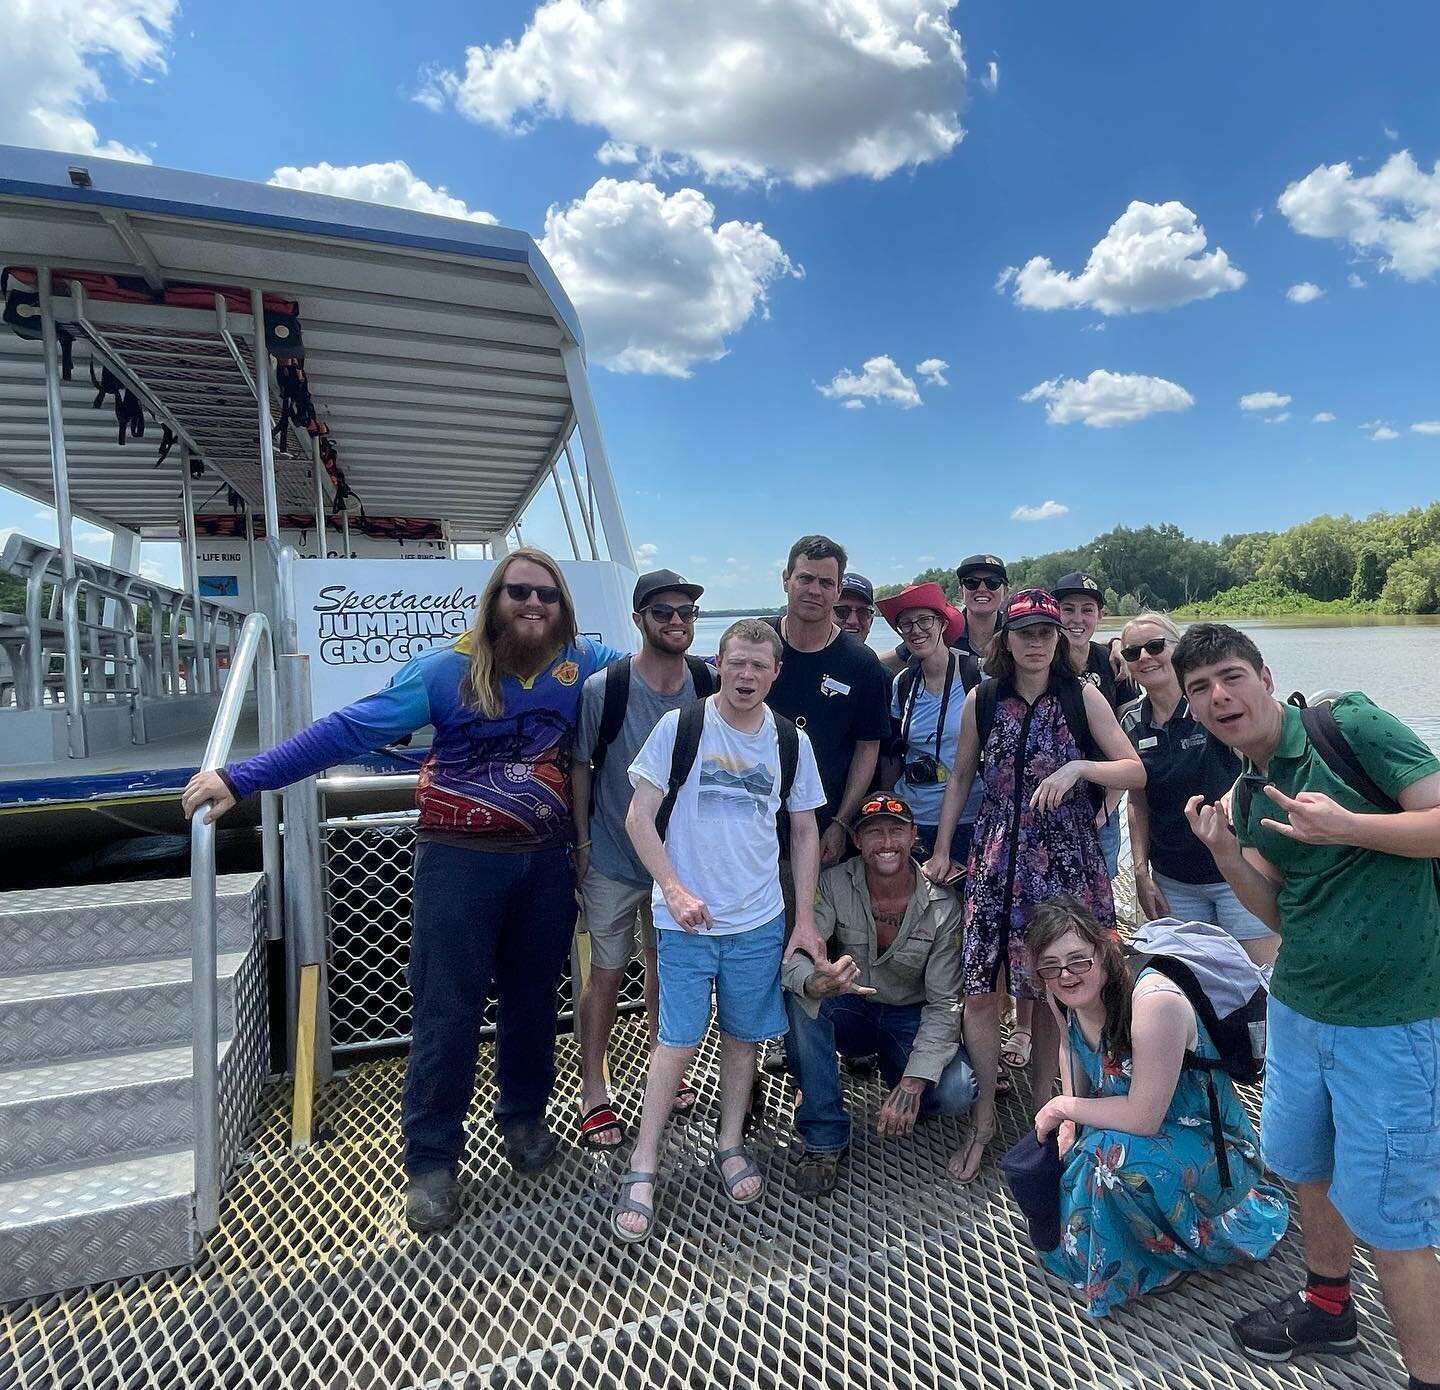 We had a fabulous day out with the Spectacular Jumping Croc crew. What a great tour and a fabulous crew, highly recommended ⭐️⭐️⭐️⭐️⭐️

@spectacularjumpingcrocodiles 
#crocodiles 
#disabilityawareness 
#disabilityinclusion 
#friendships 
#fun